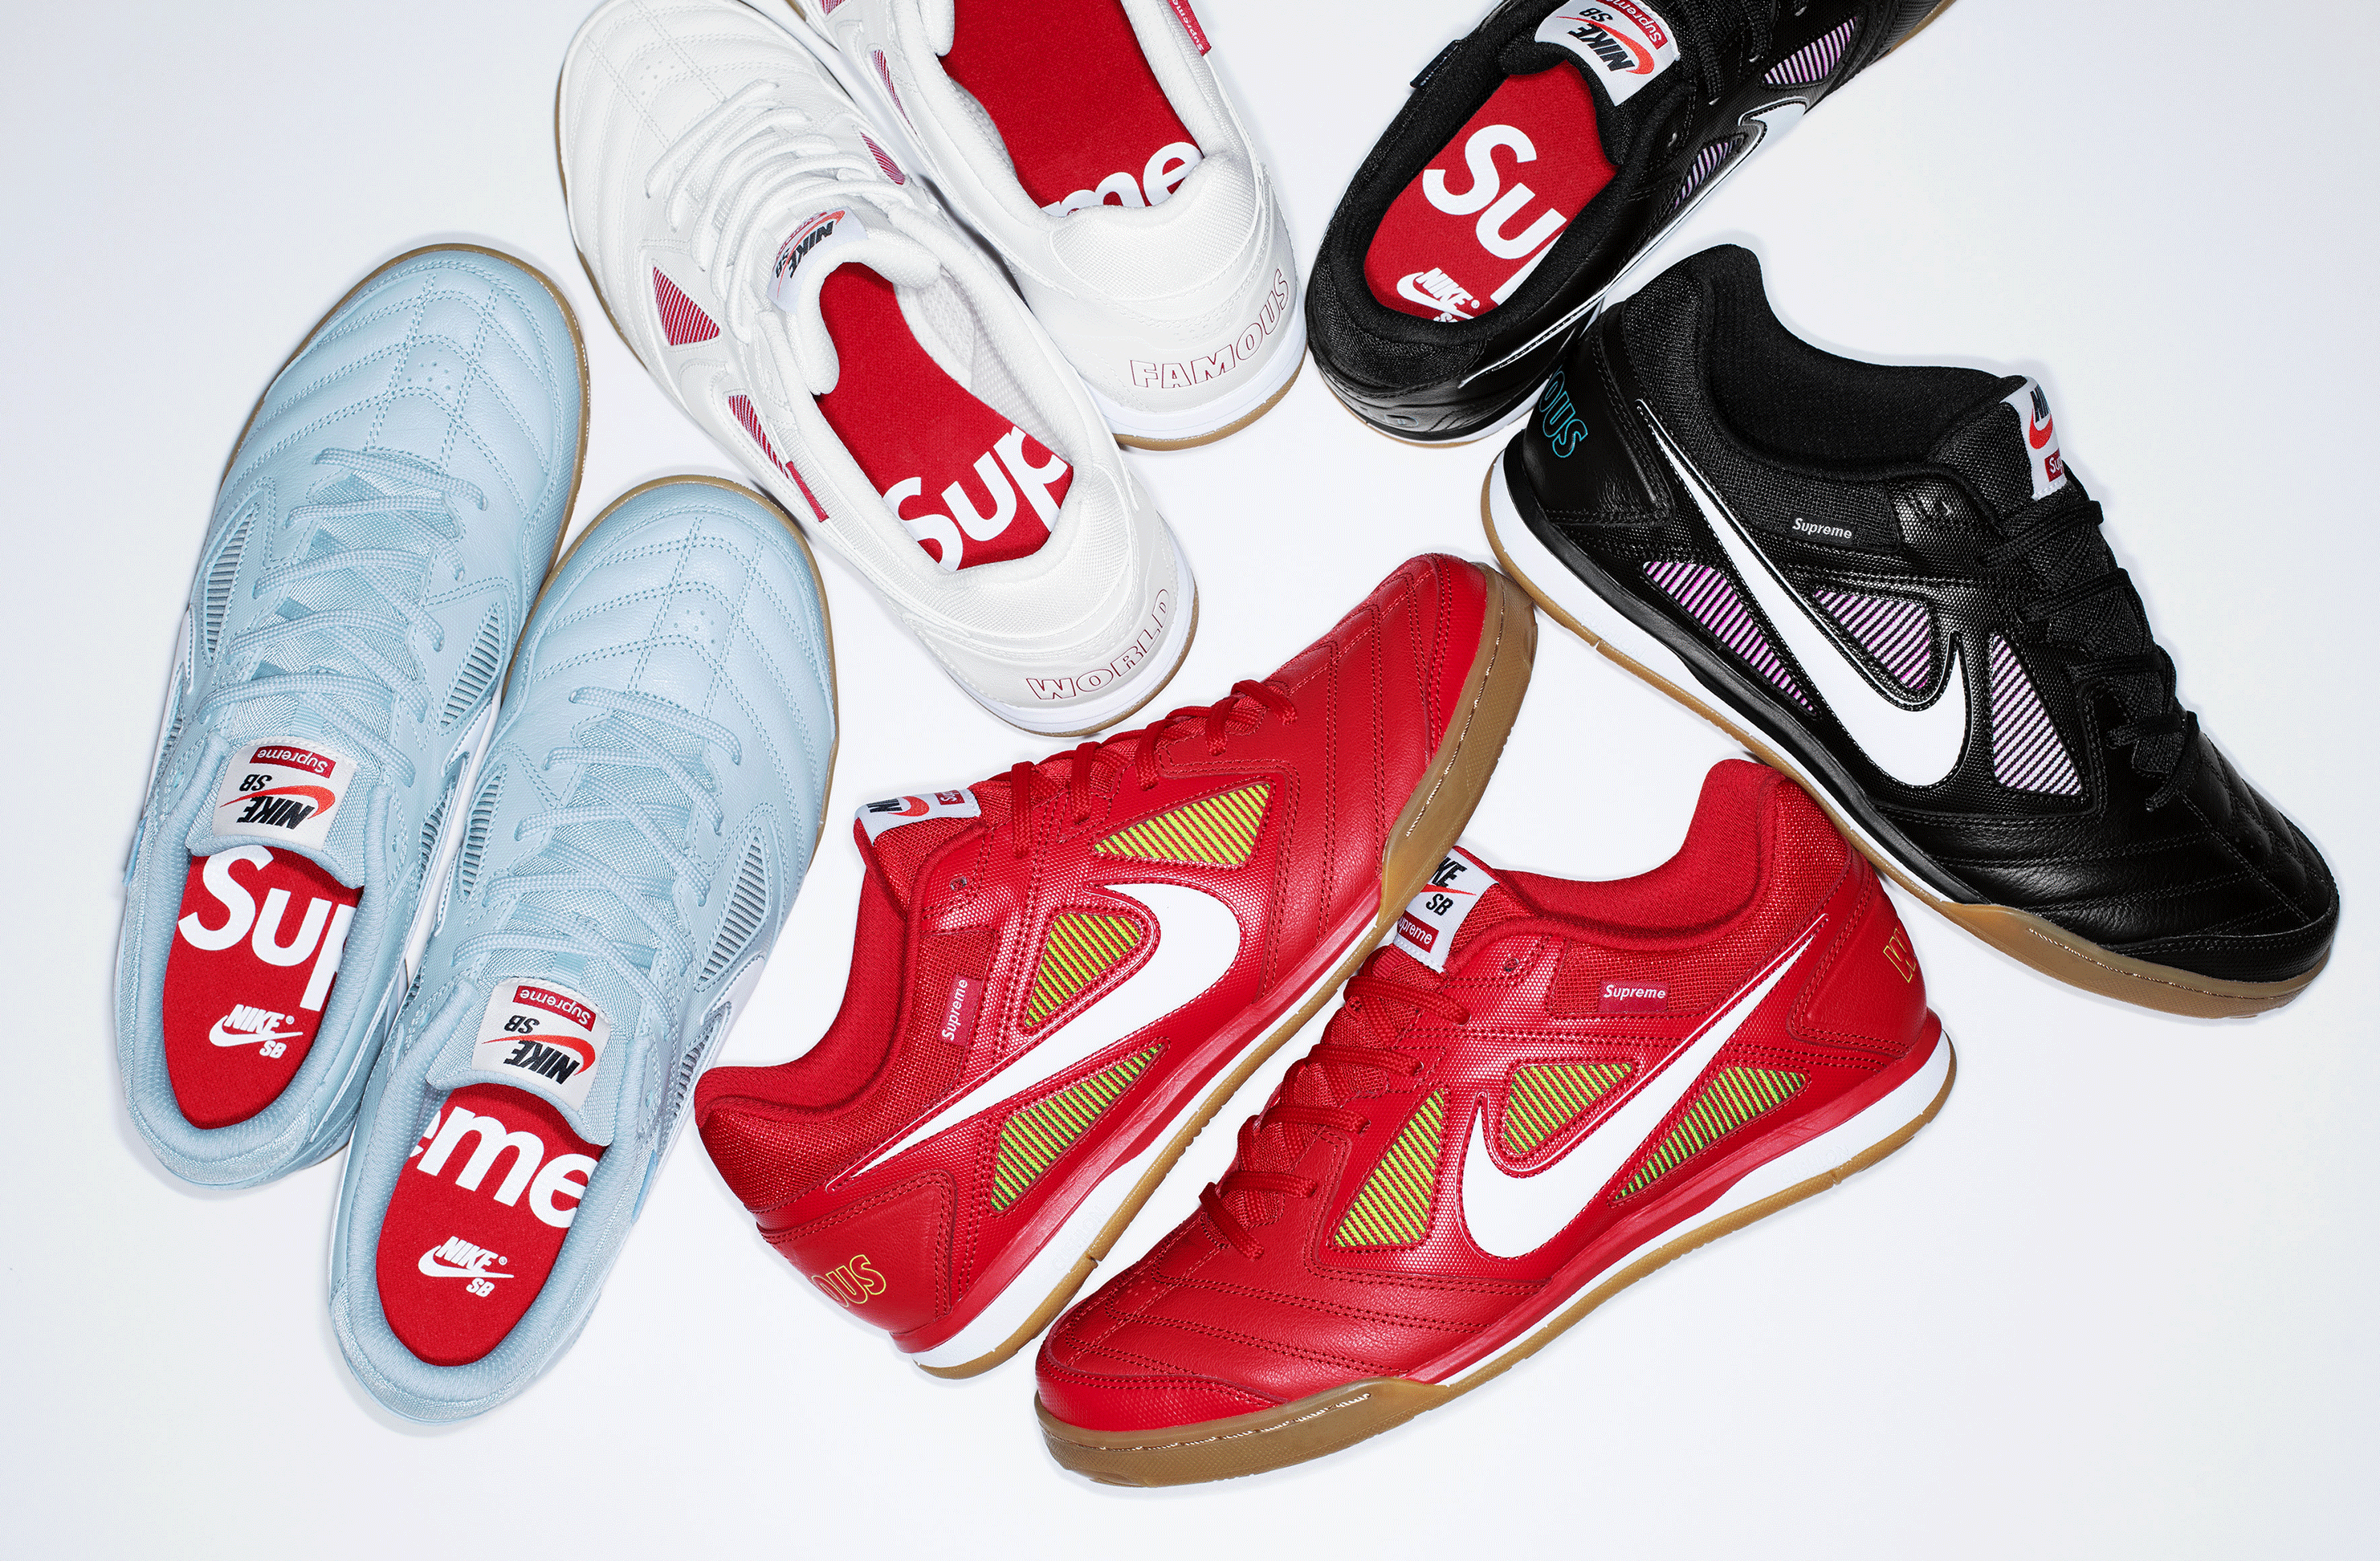 Ranking All Supreme's Nike Collaborations, From Worst to Best Complex